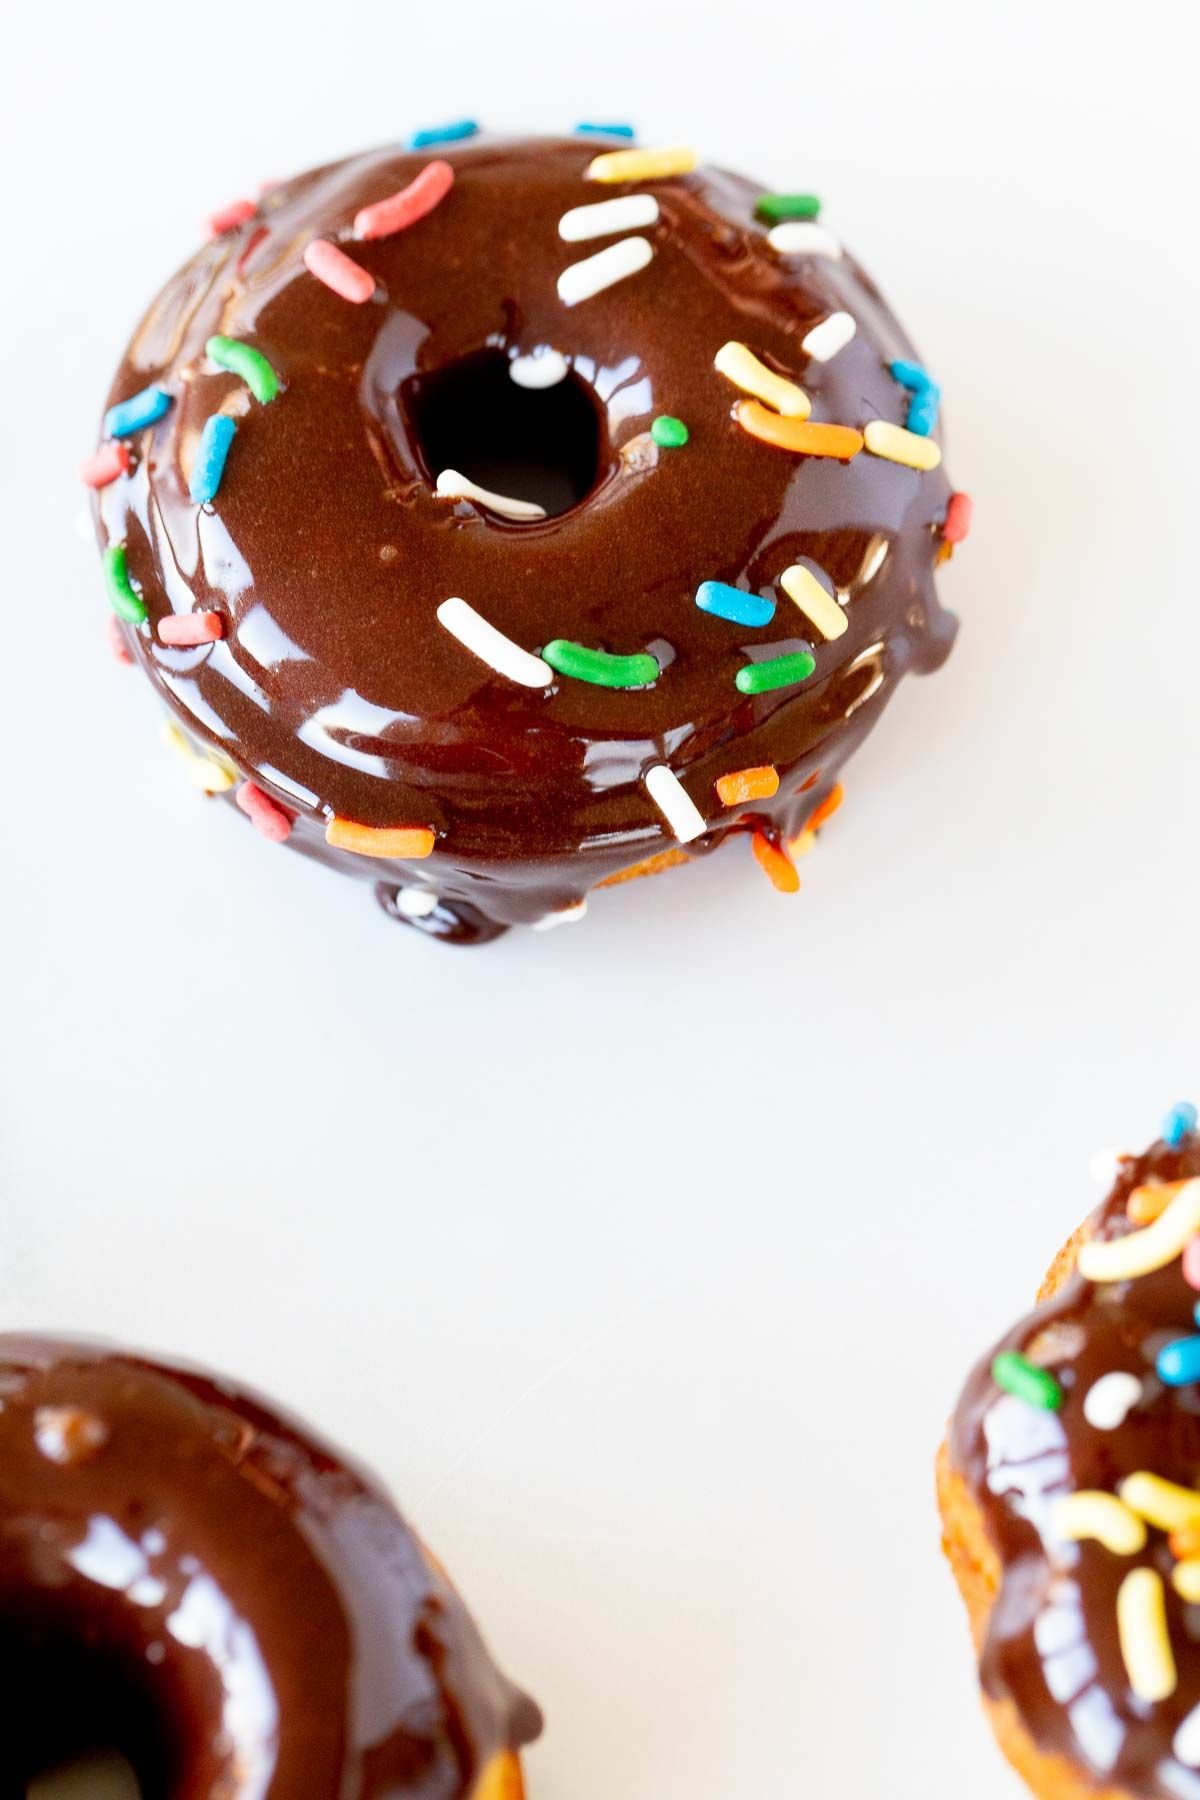 Baked donuts topped with chocolate frosting and sprinkles, on a marble countertop.